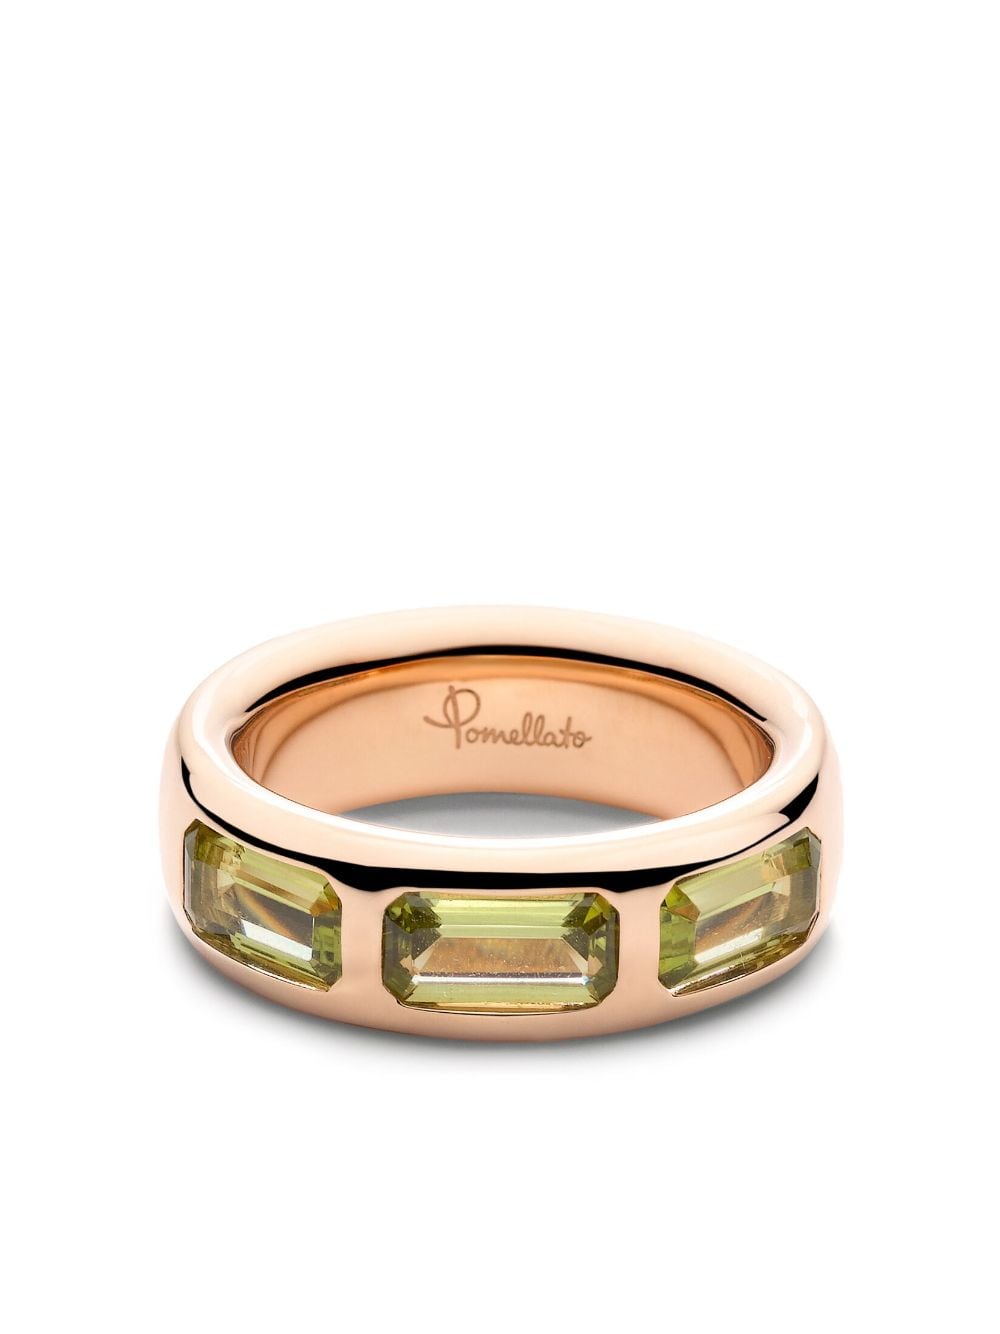 18kt rose gold Iconica ring